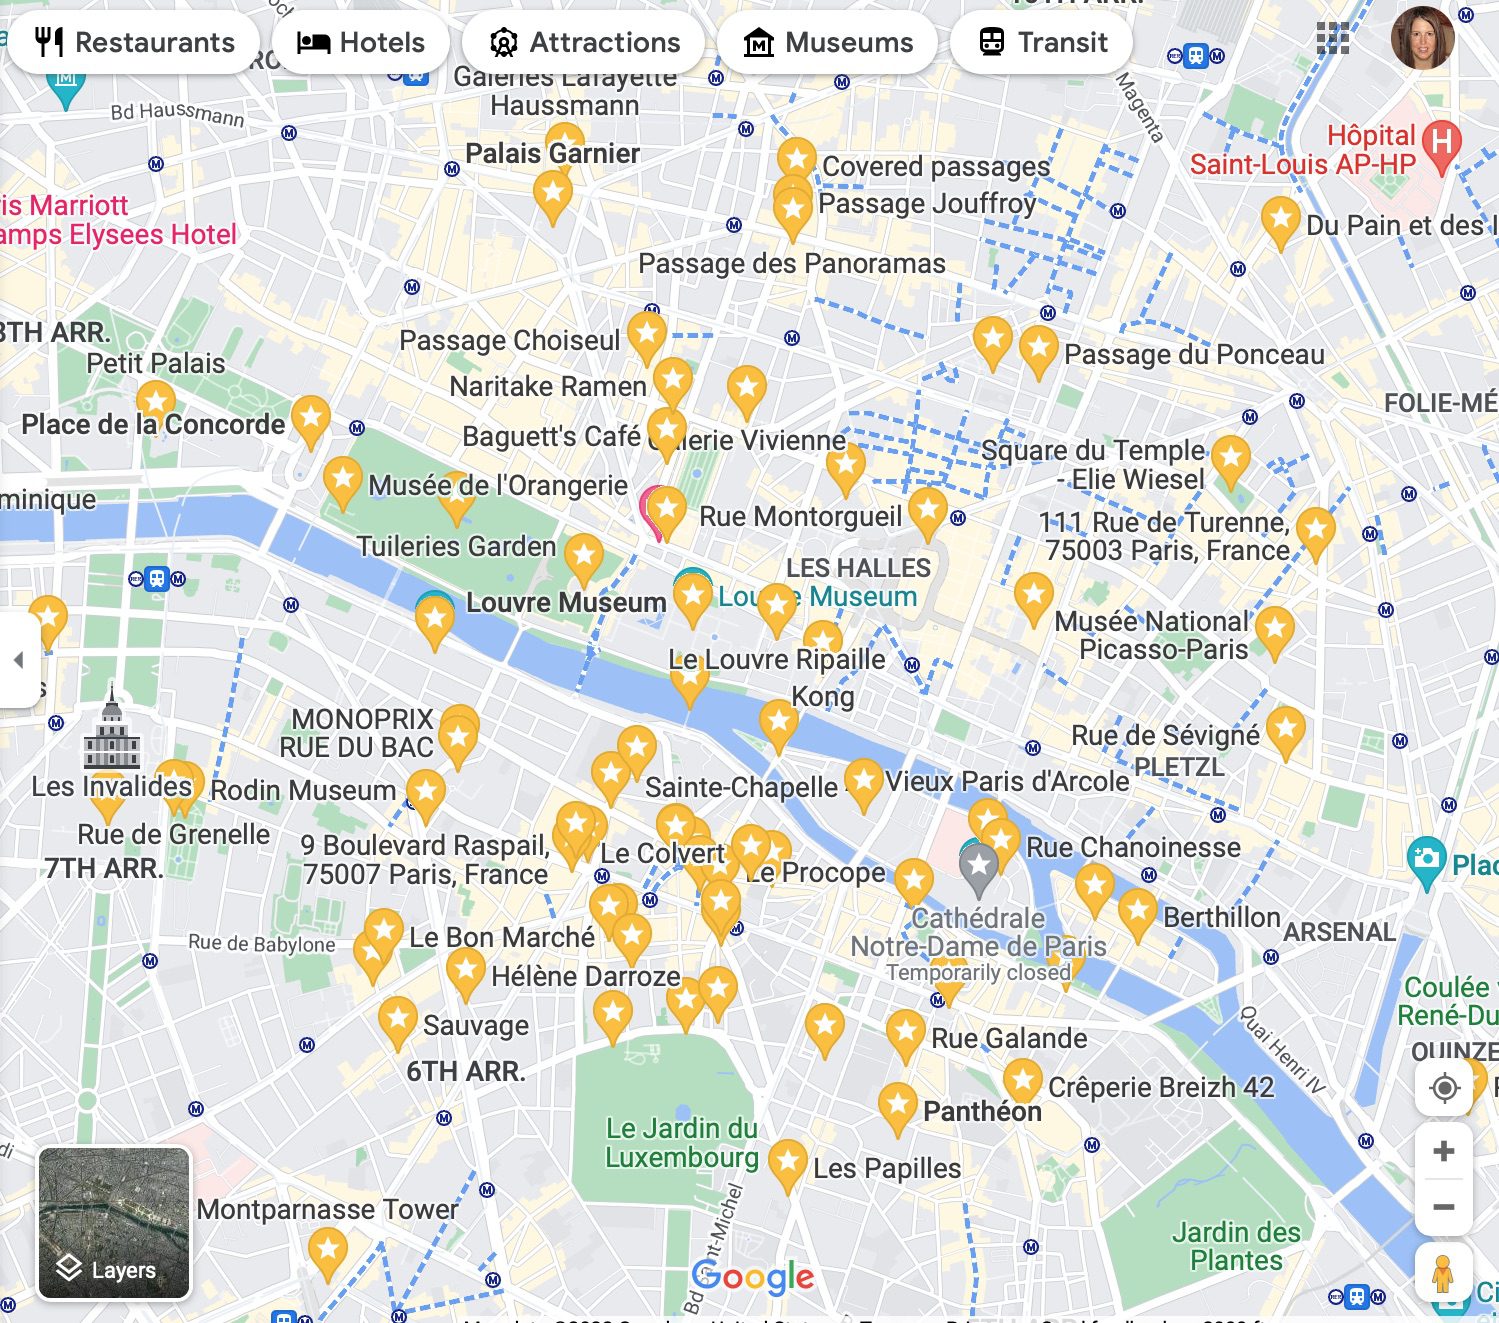 Google Map of Paris with points of interest starred and saved